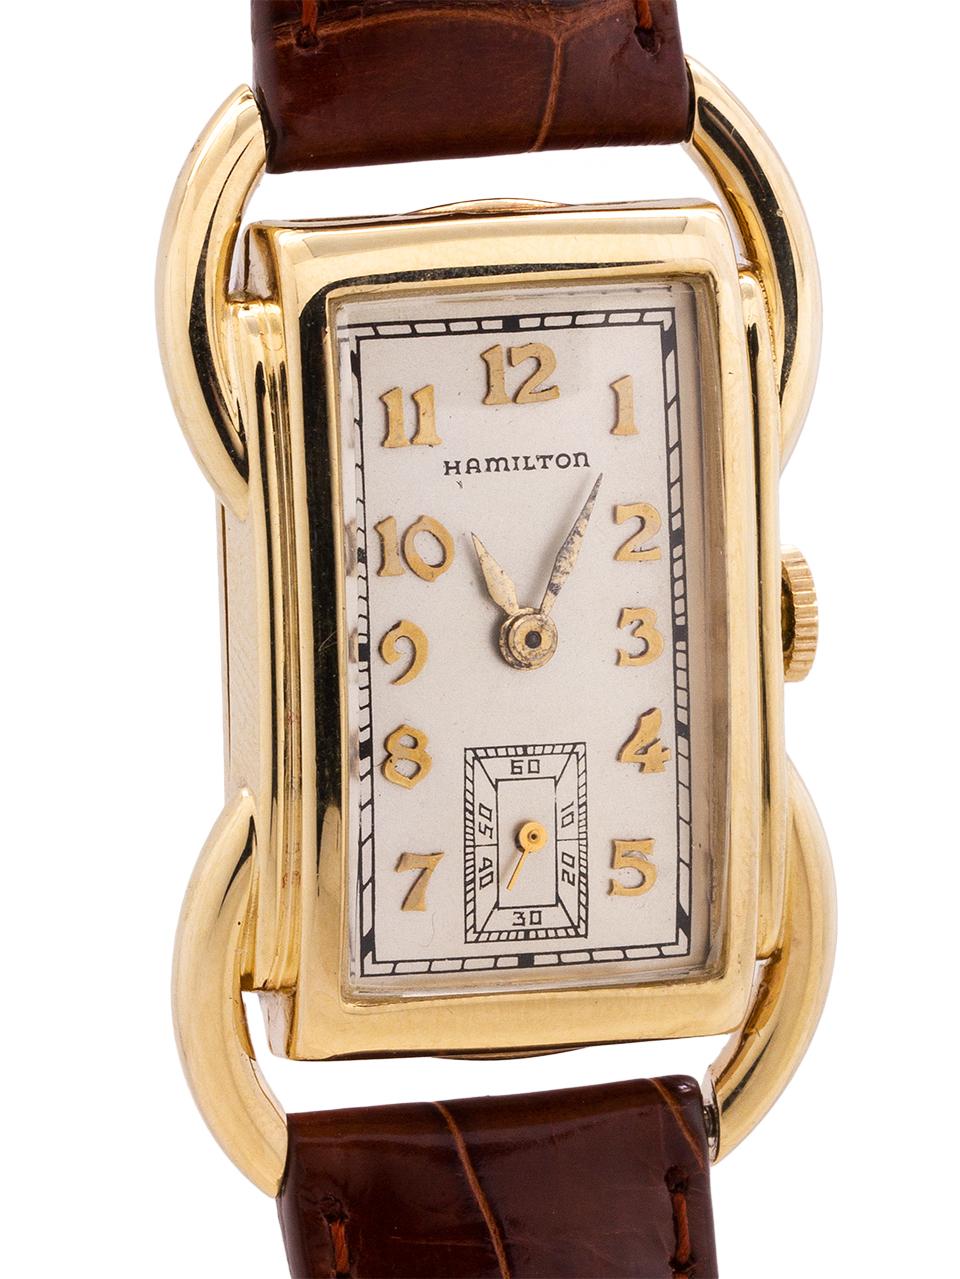 
Vintage man’s Hamilton 14K YG “Bentley” model. The Bentley is one of the most distinctive case designs of the early Hamilton models with prominent curved tubes on each side of the case and extending beyond the case to form the lugs. The watch